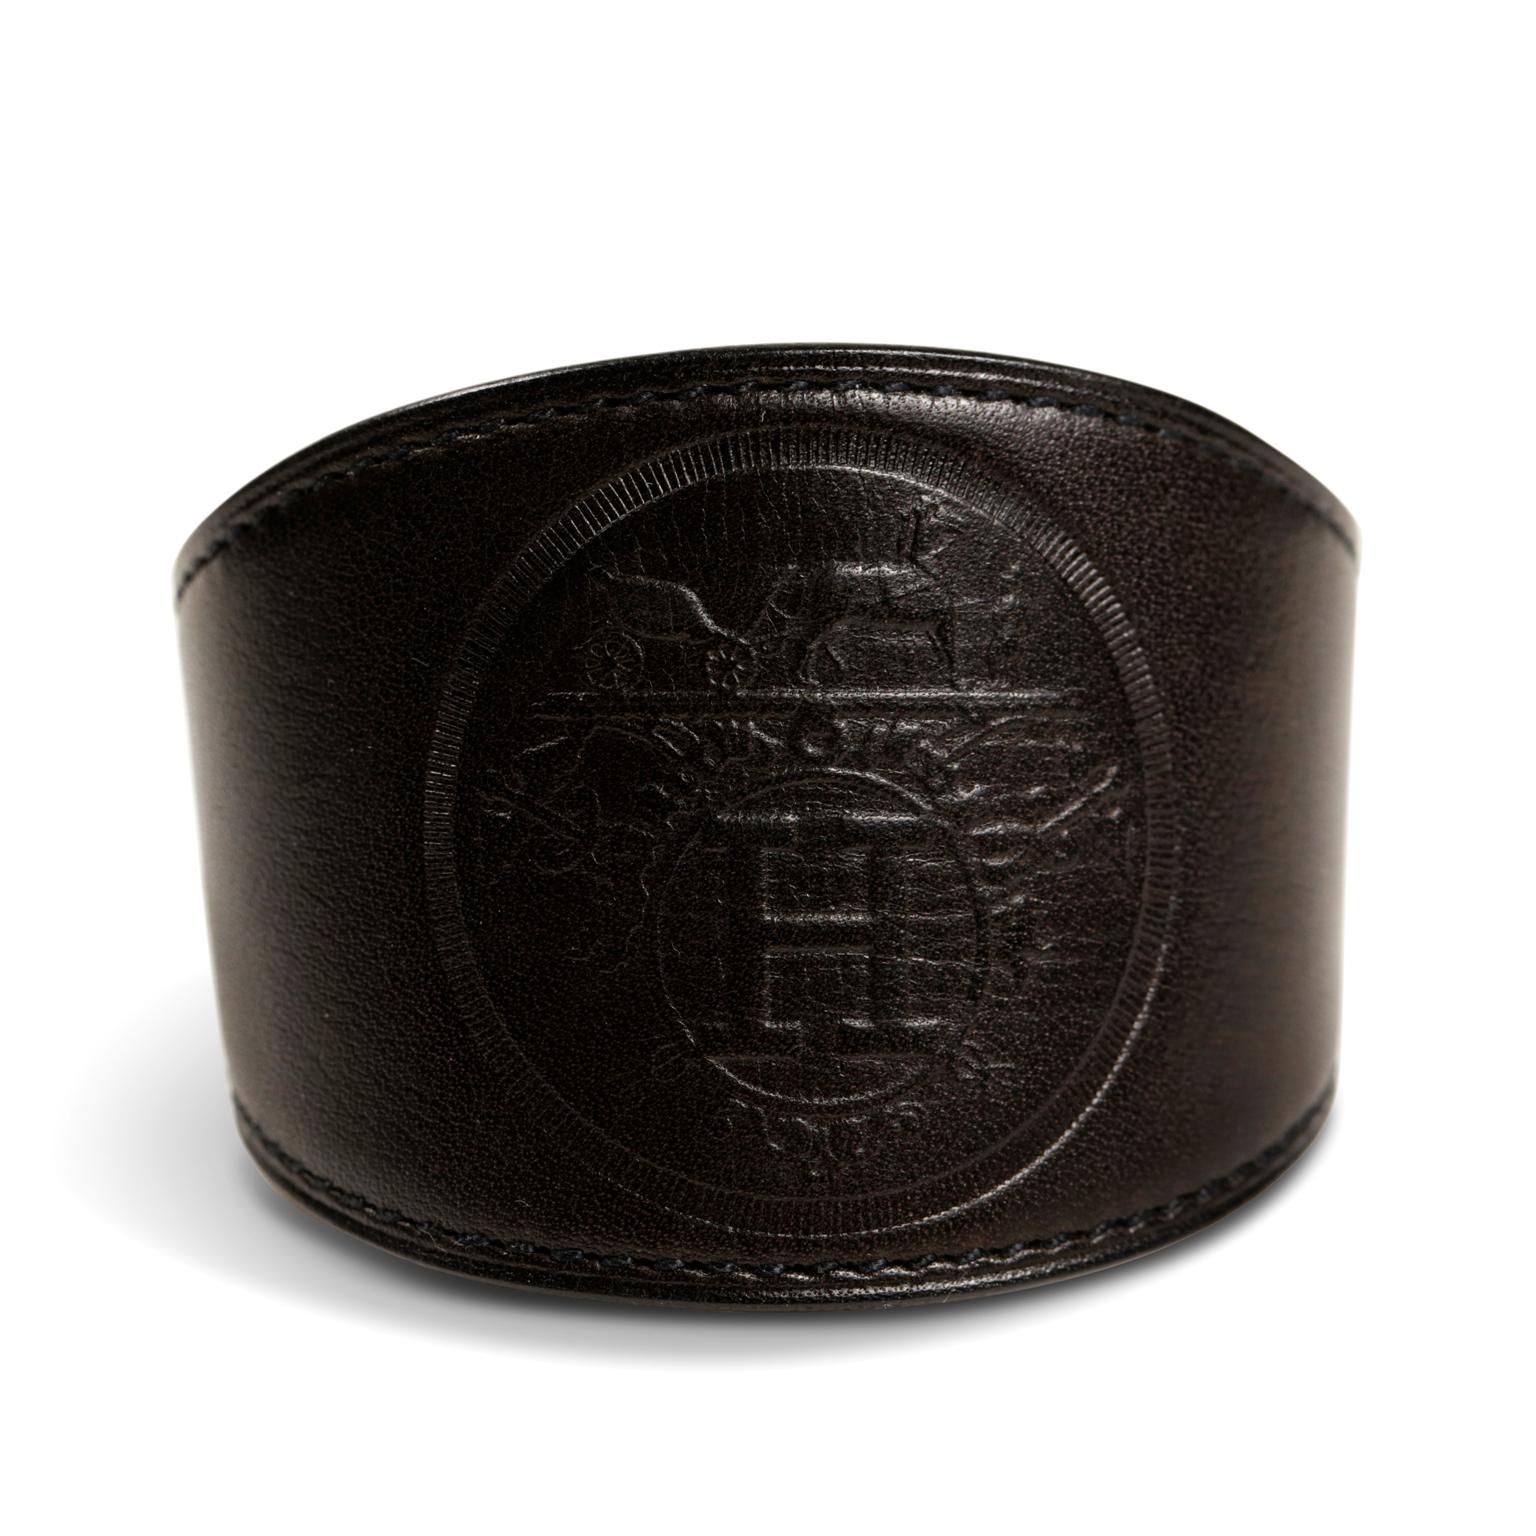 Hermès Black Leather Ex Libris Cuff Bracelet-  Excellent Condition
  The simple design can be worn with anything year-round and is equally suitable for both men and women.  Black leather wide cuff has stamped imprint of Ex Libris design- iconic